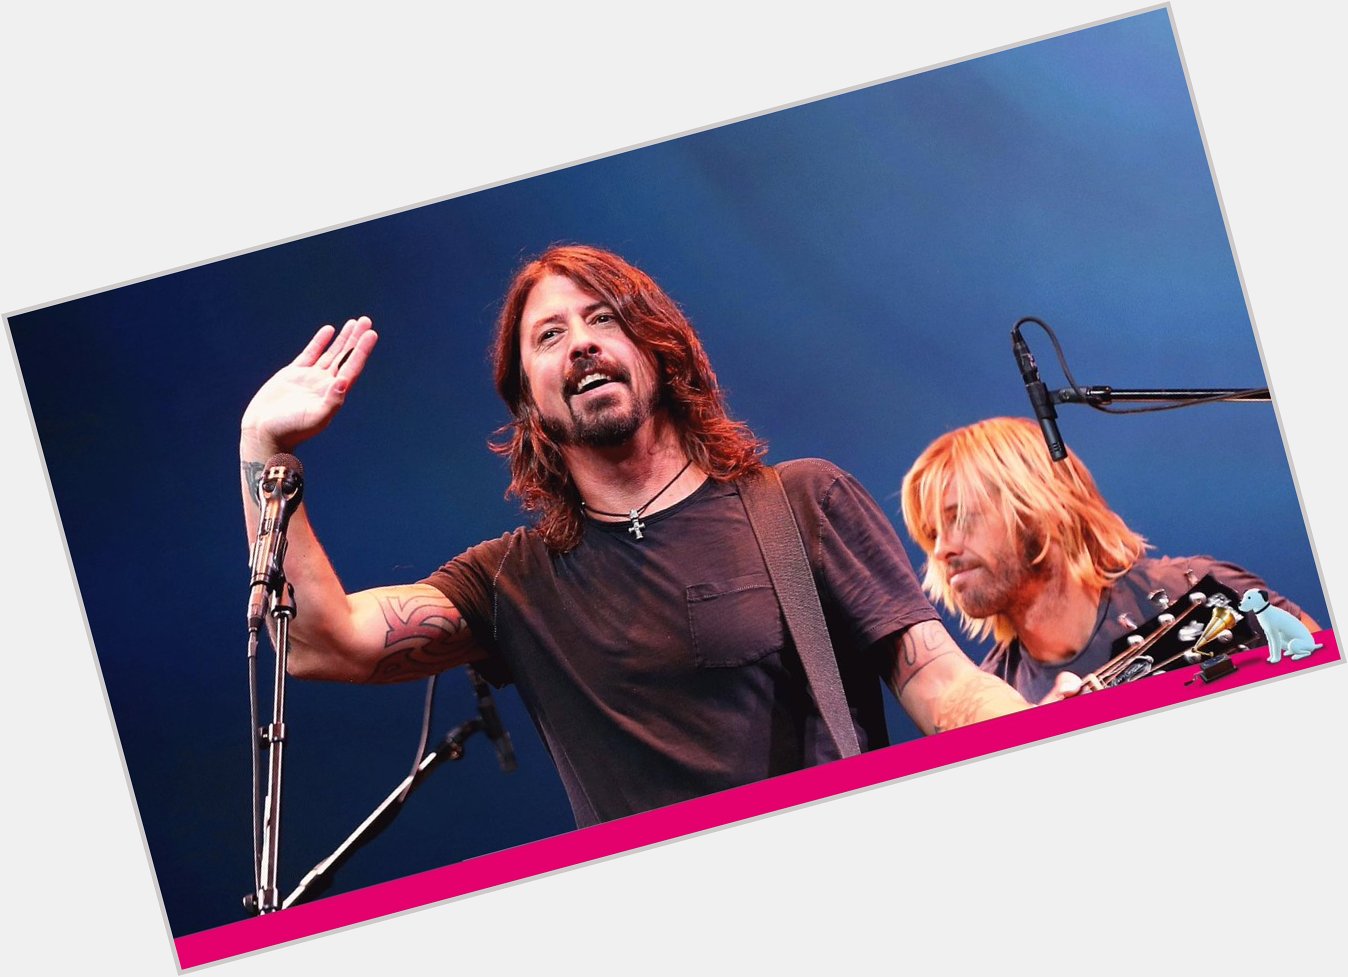 Happy 50th birthday to the one and only Dave Grohl! 